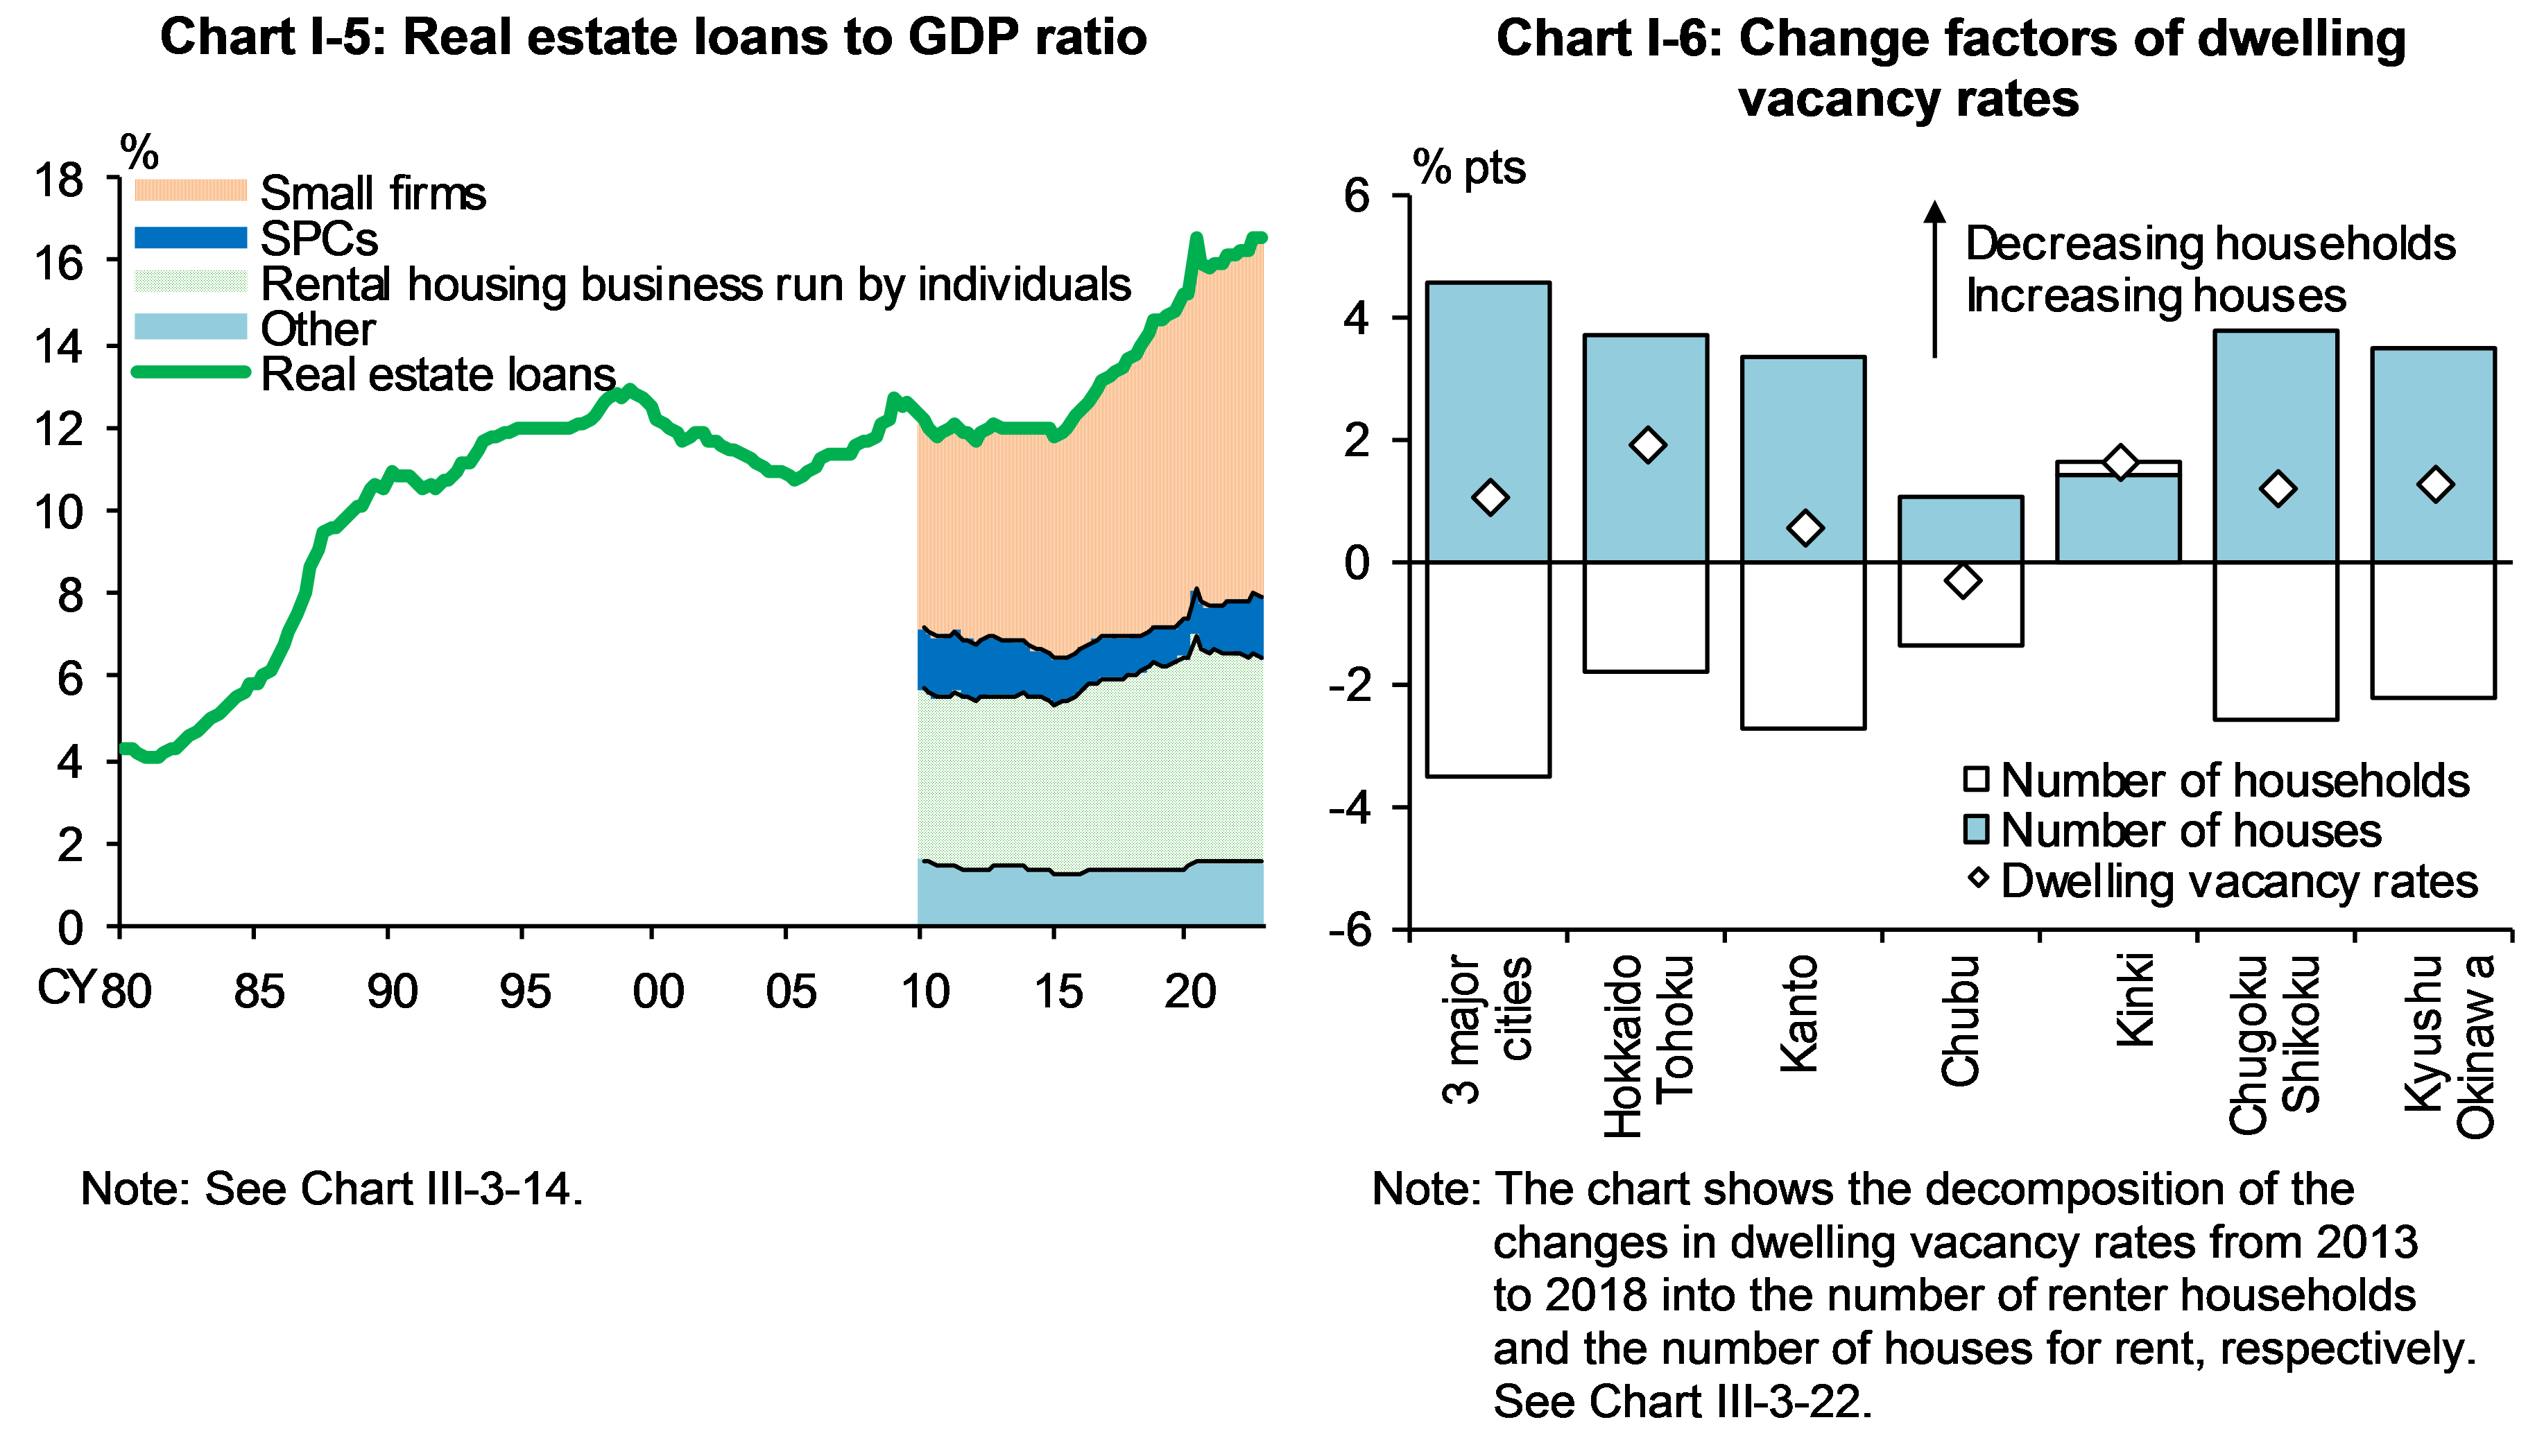 Chart I-5 shows Real estate loans to GDP ratio and Chart I-6 shows Change factors of dwelling vacancy rates.